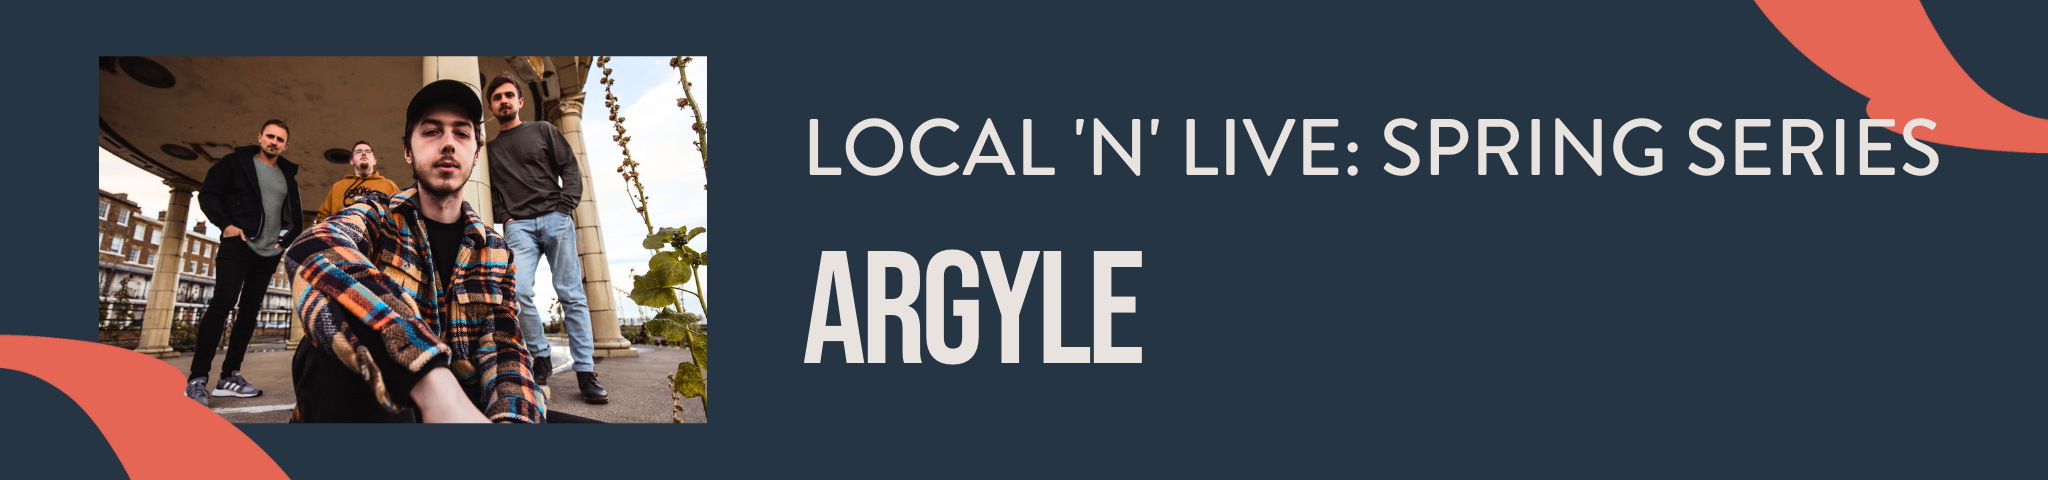 ARGYLE – LOCAL ‘N’ LIVE SPRING SERIES – 17TH MAY